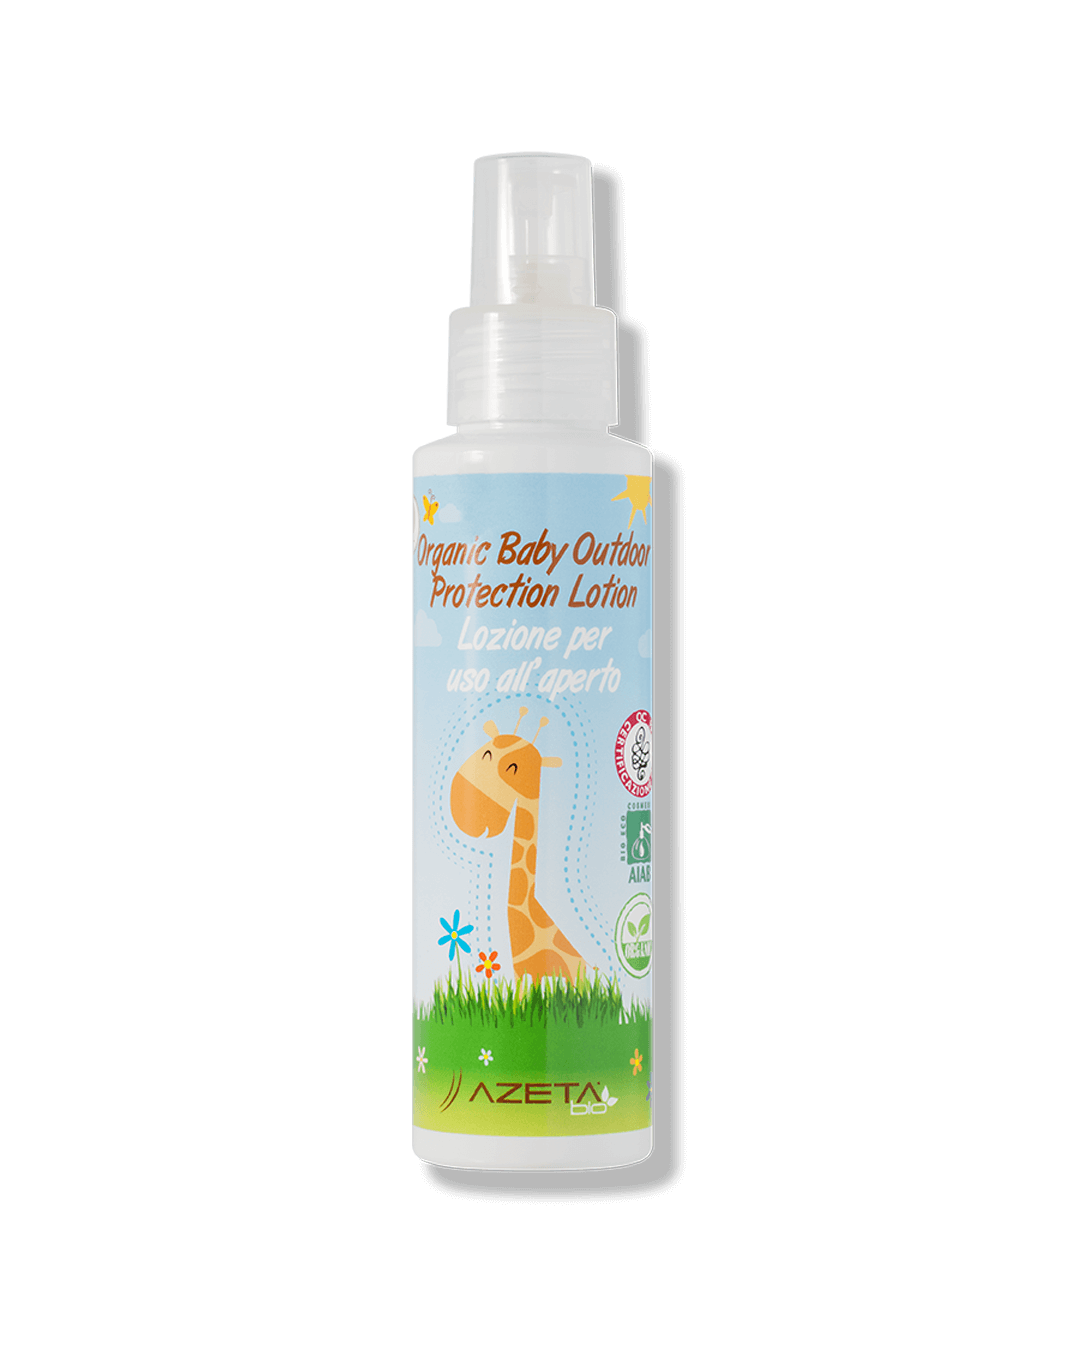 Organic Baby Outdoor Protection Lotion